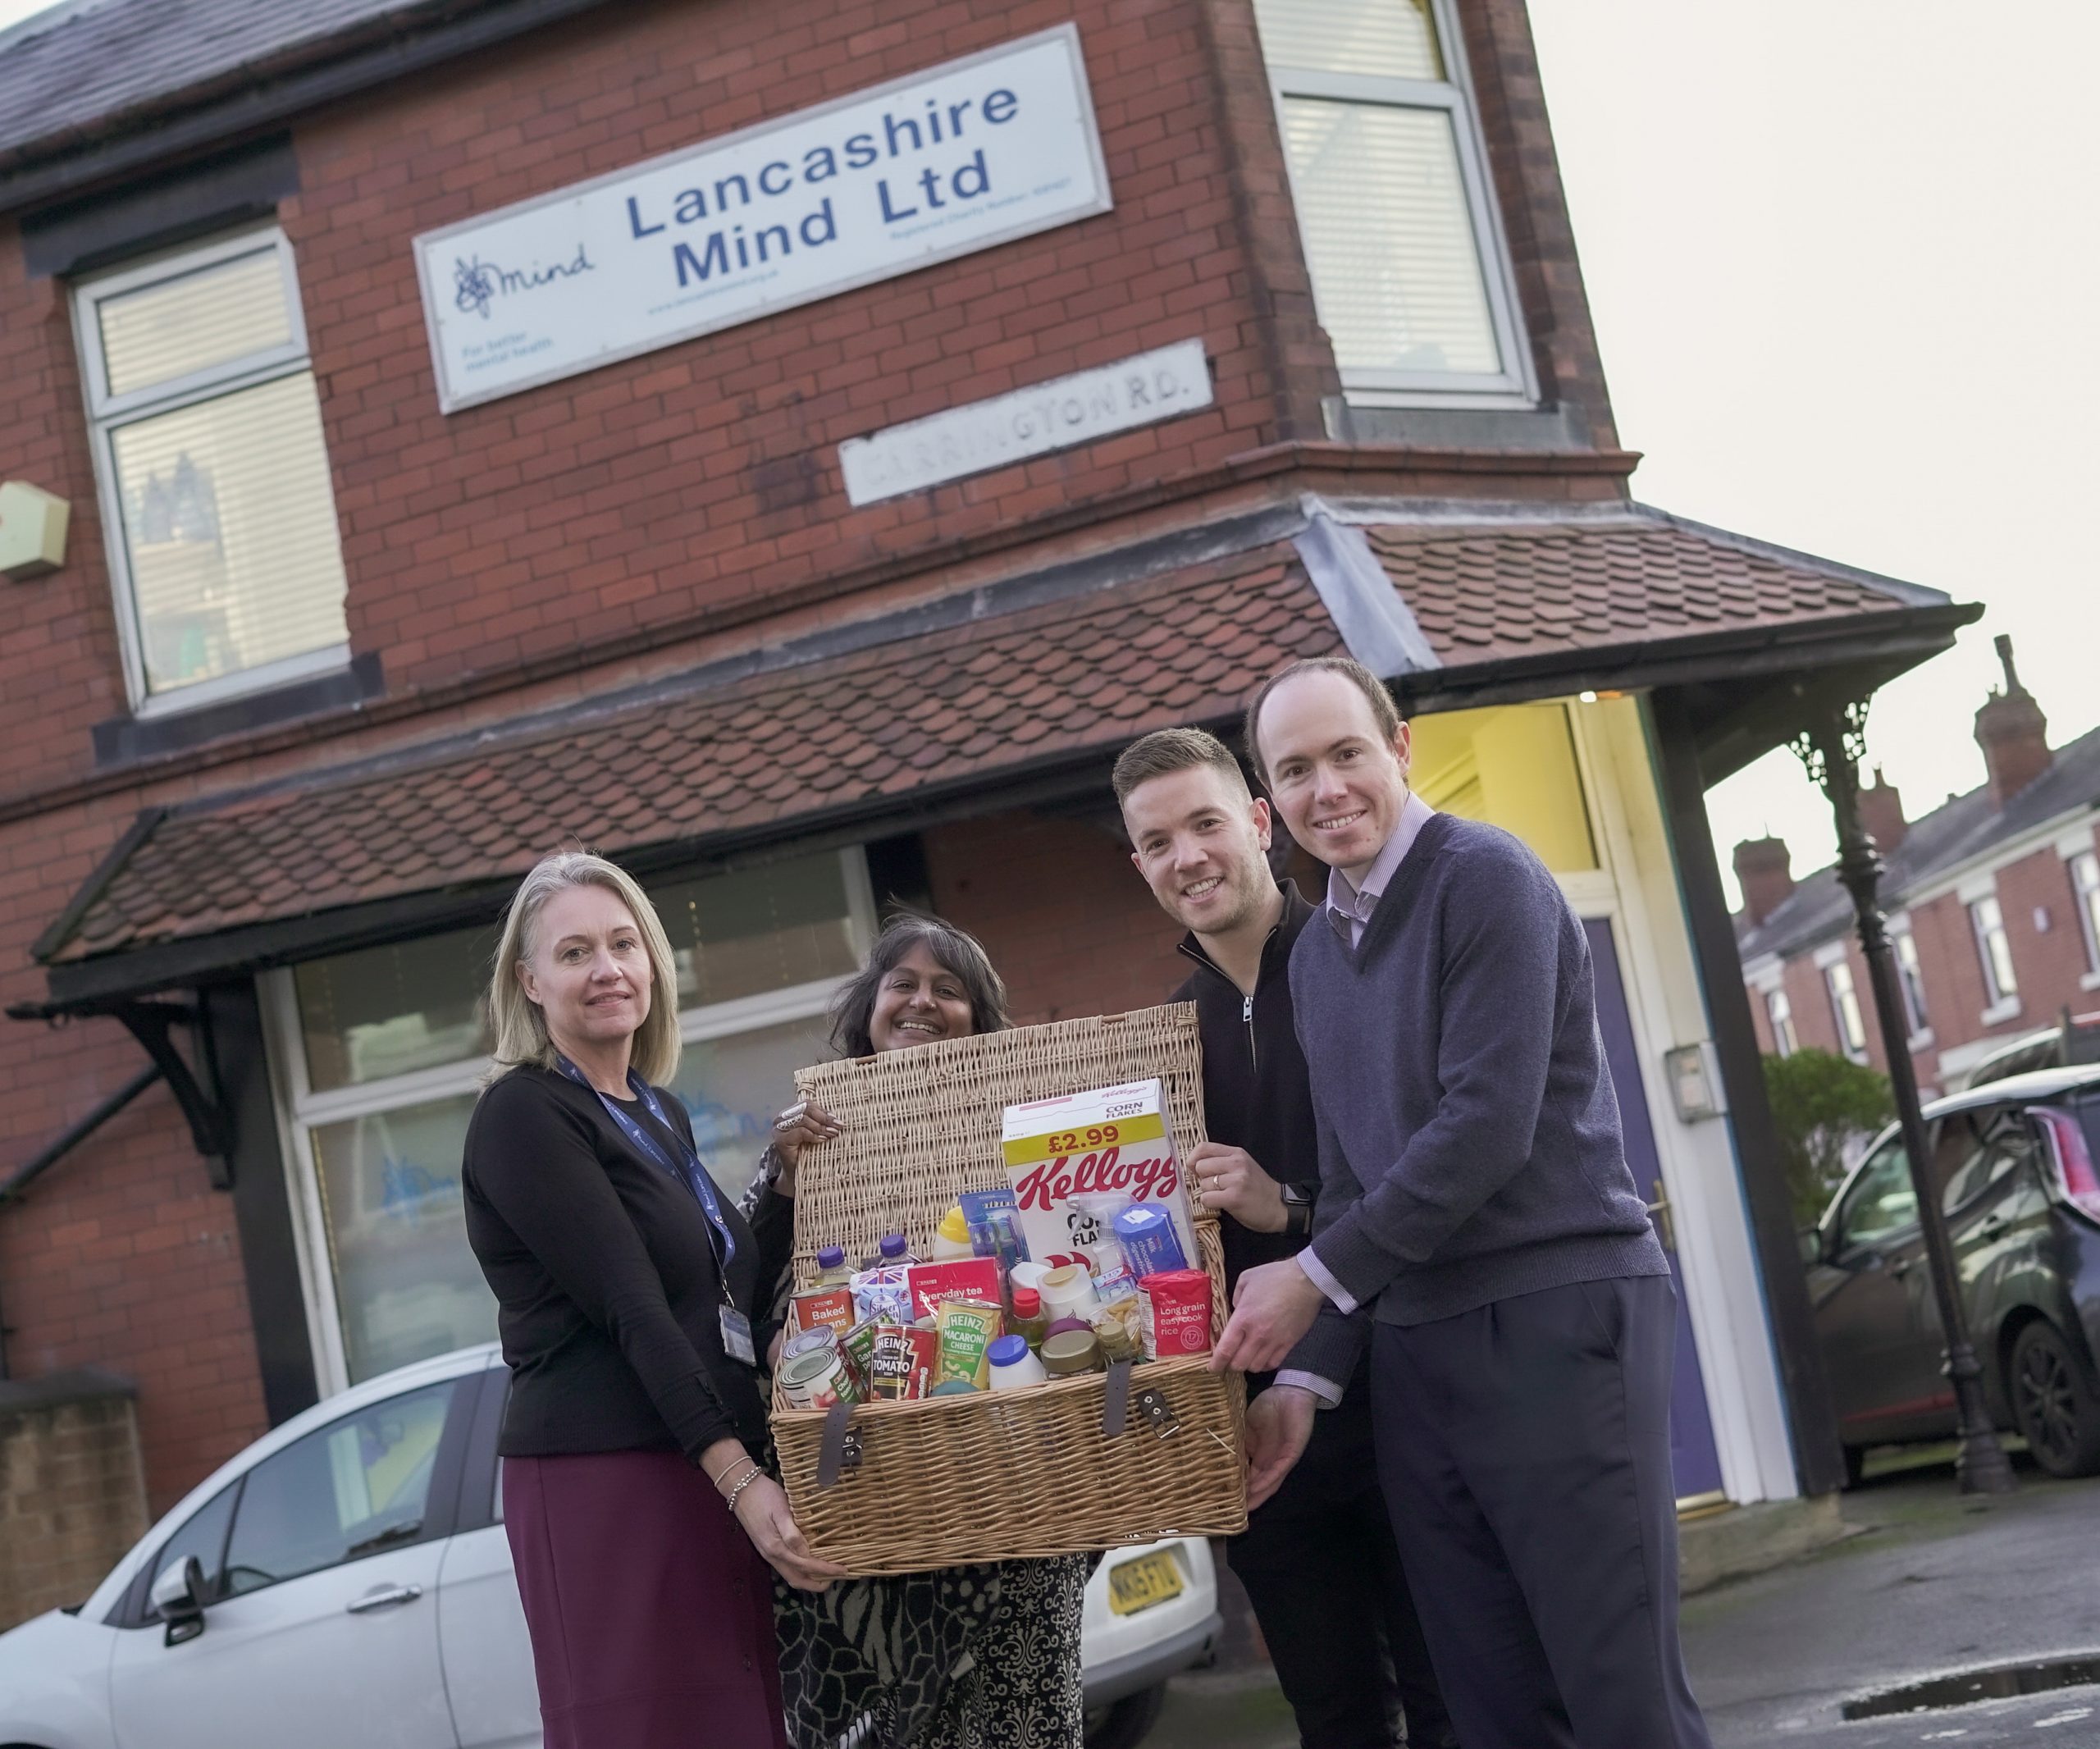 SPAR starts season of goodwill with donation of home starter hampers to Lancashire Mind